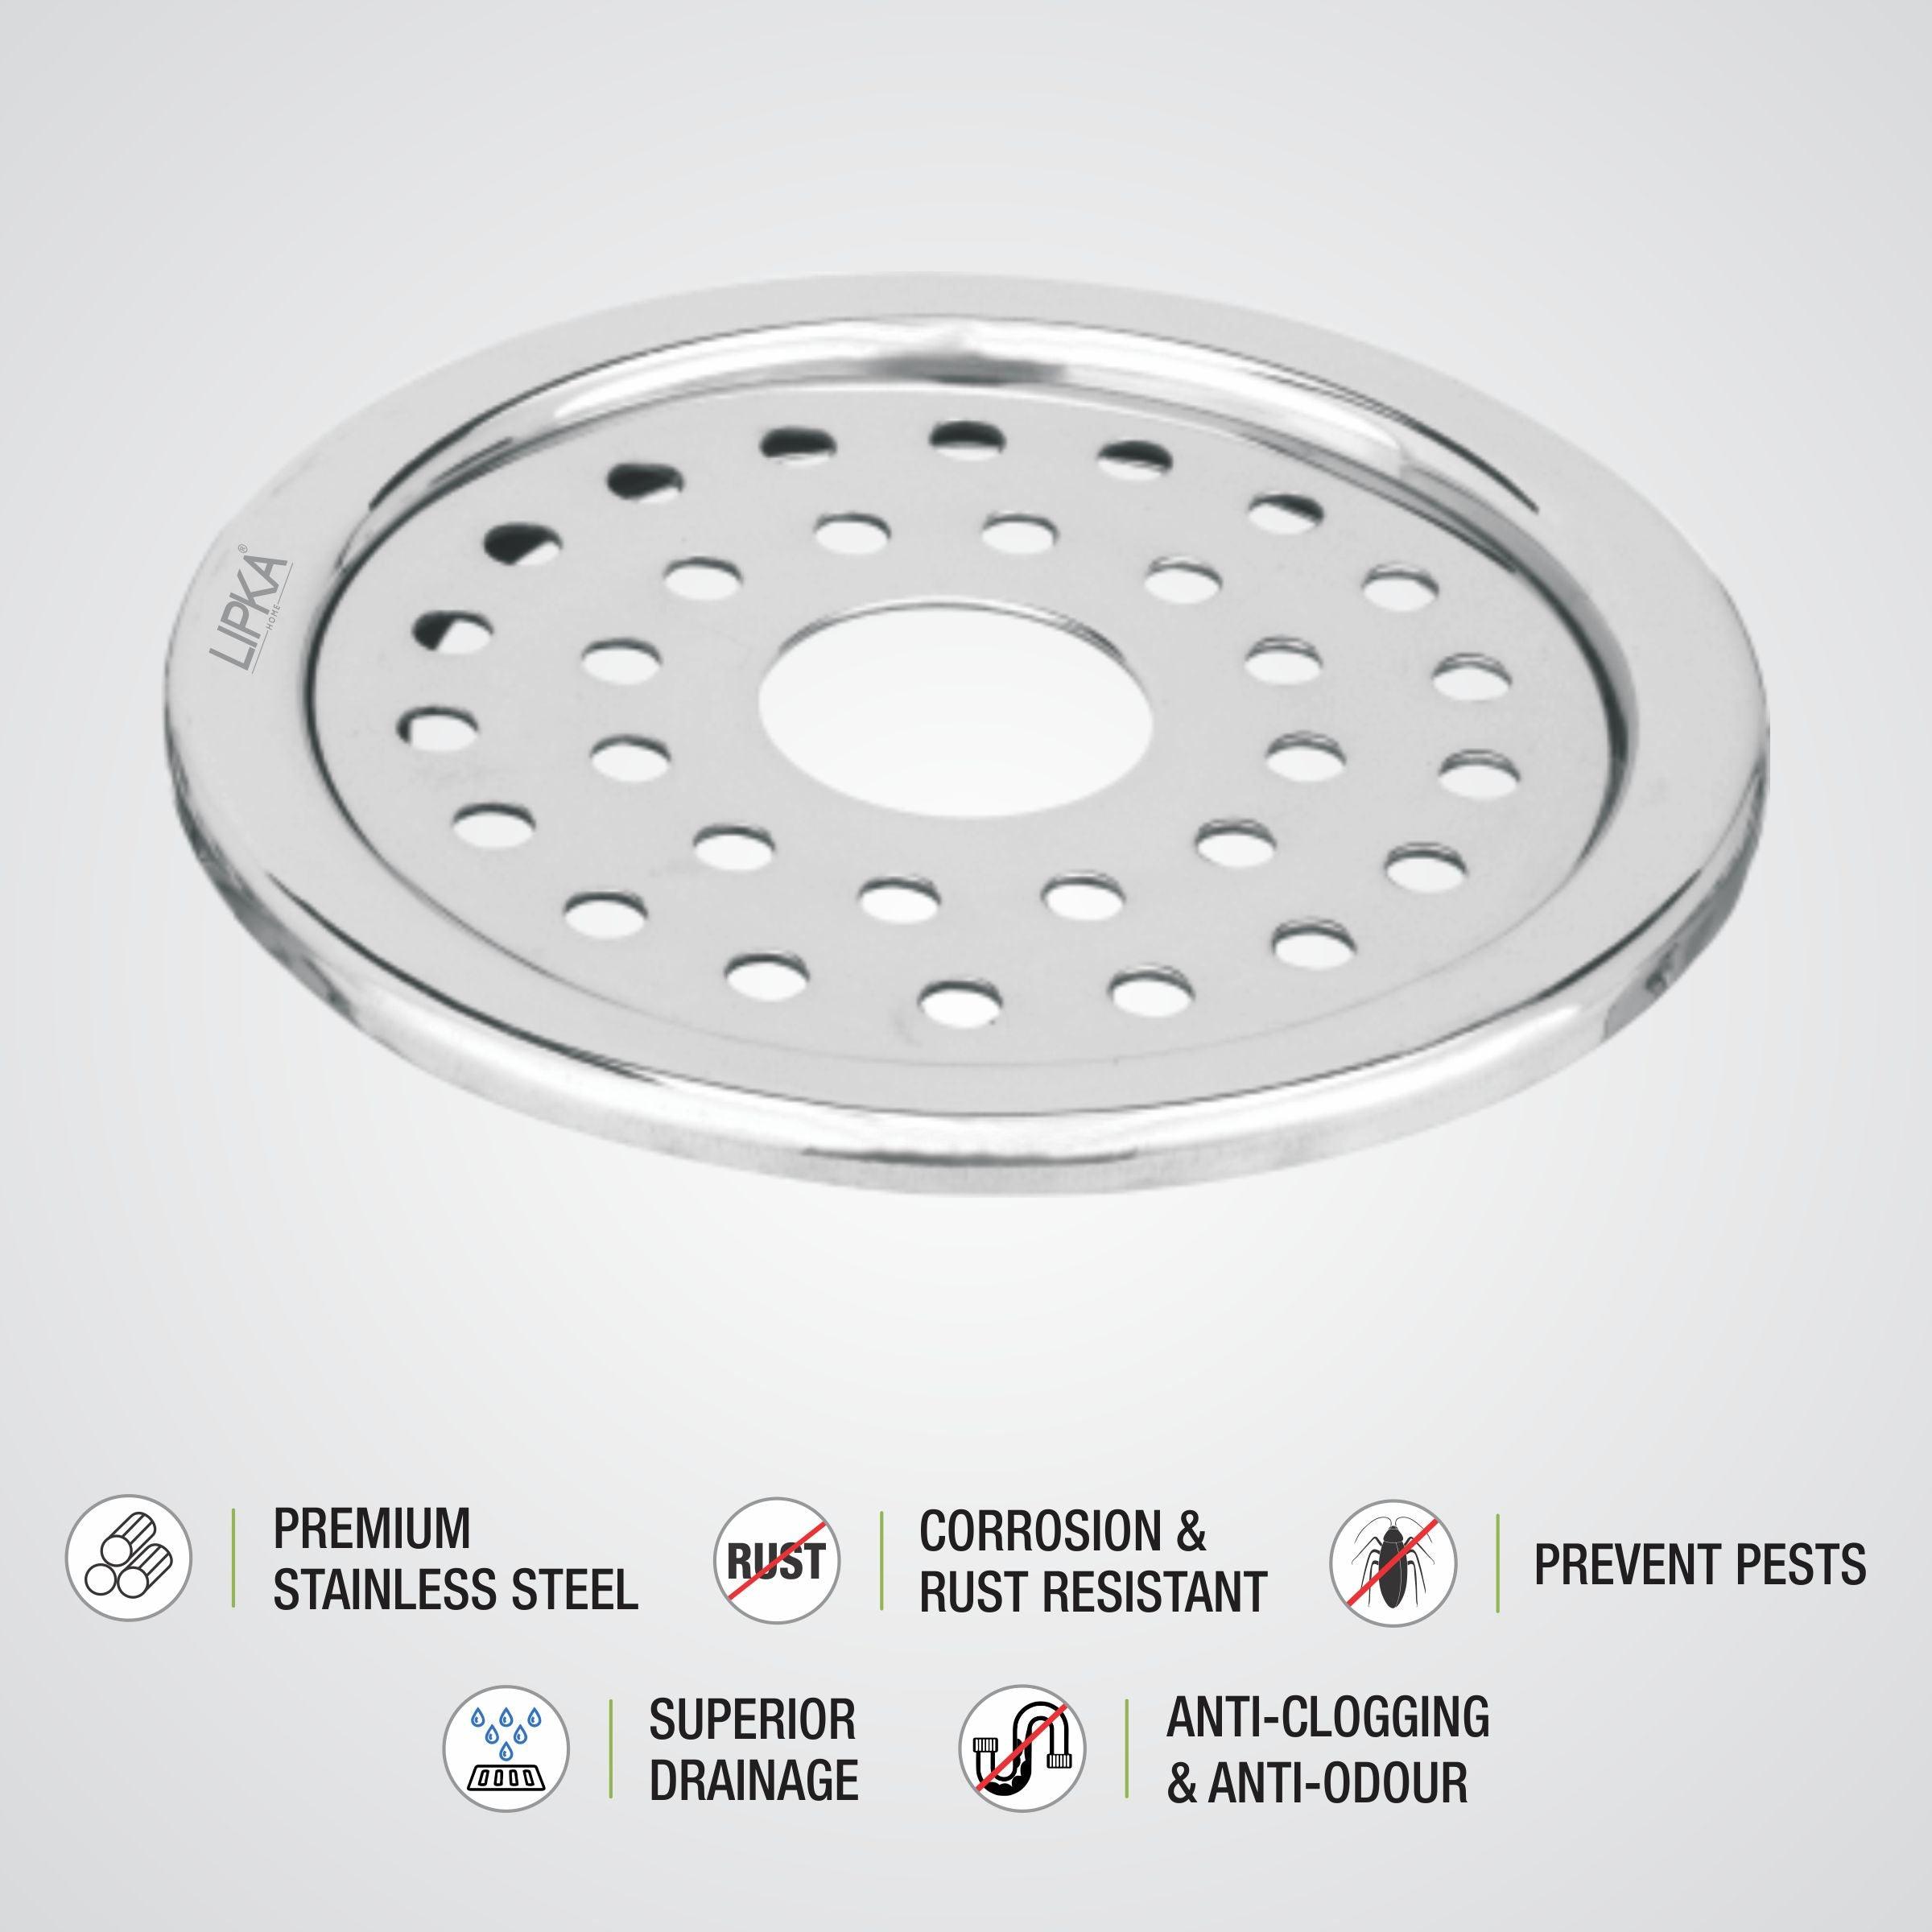 Eon Round Floor Drain with Plain Jali & Hole (5 inches) features